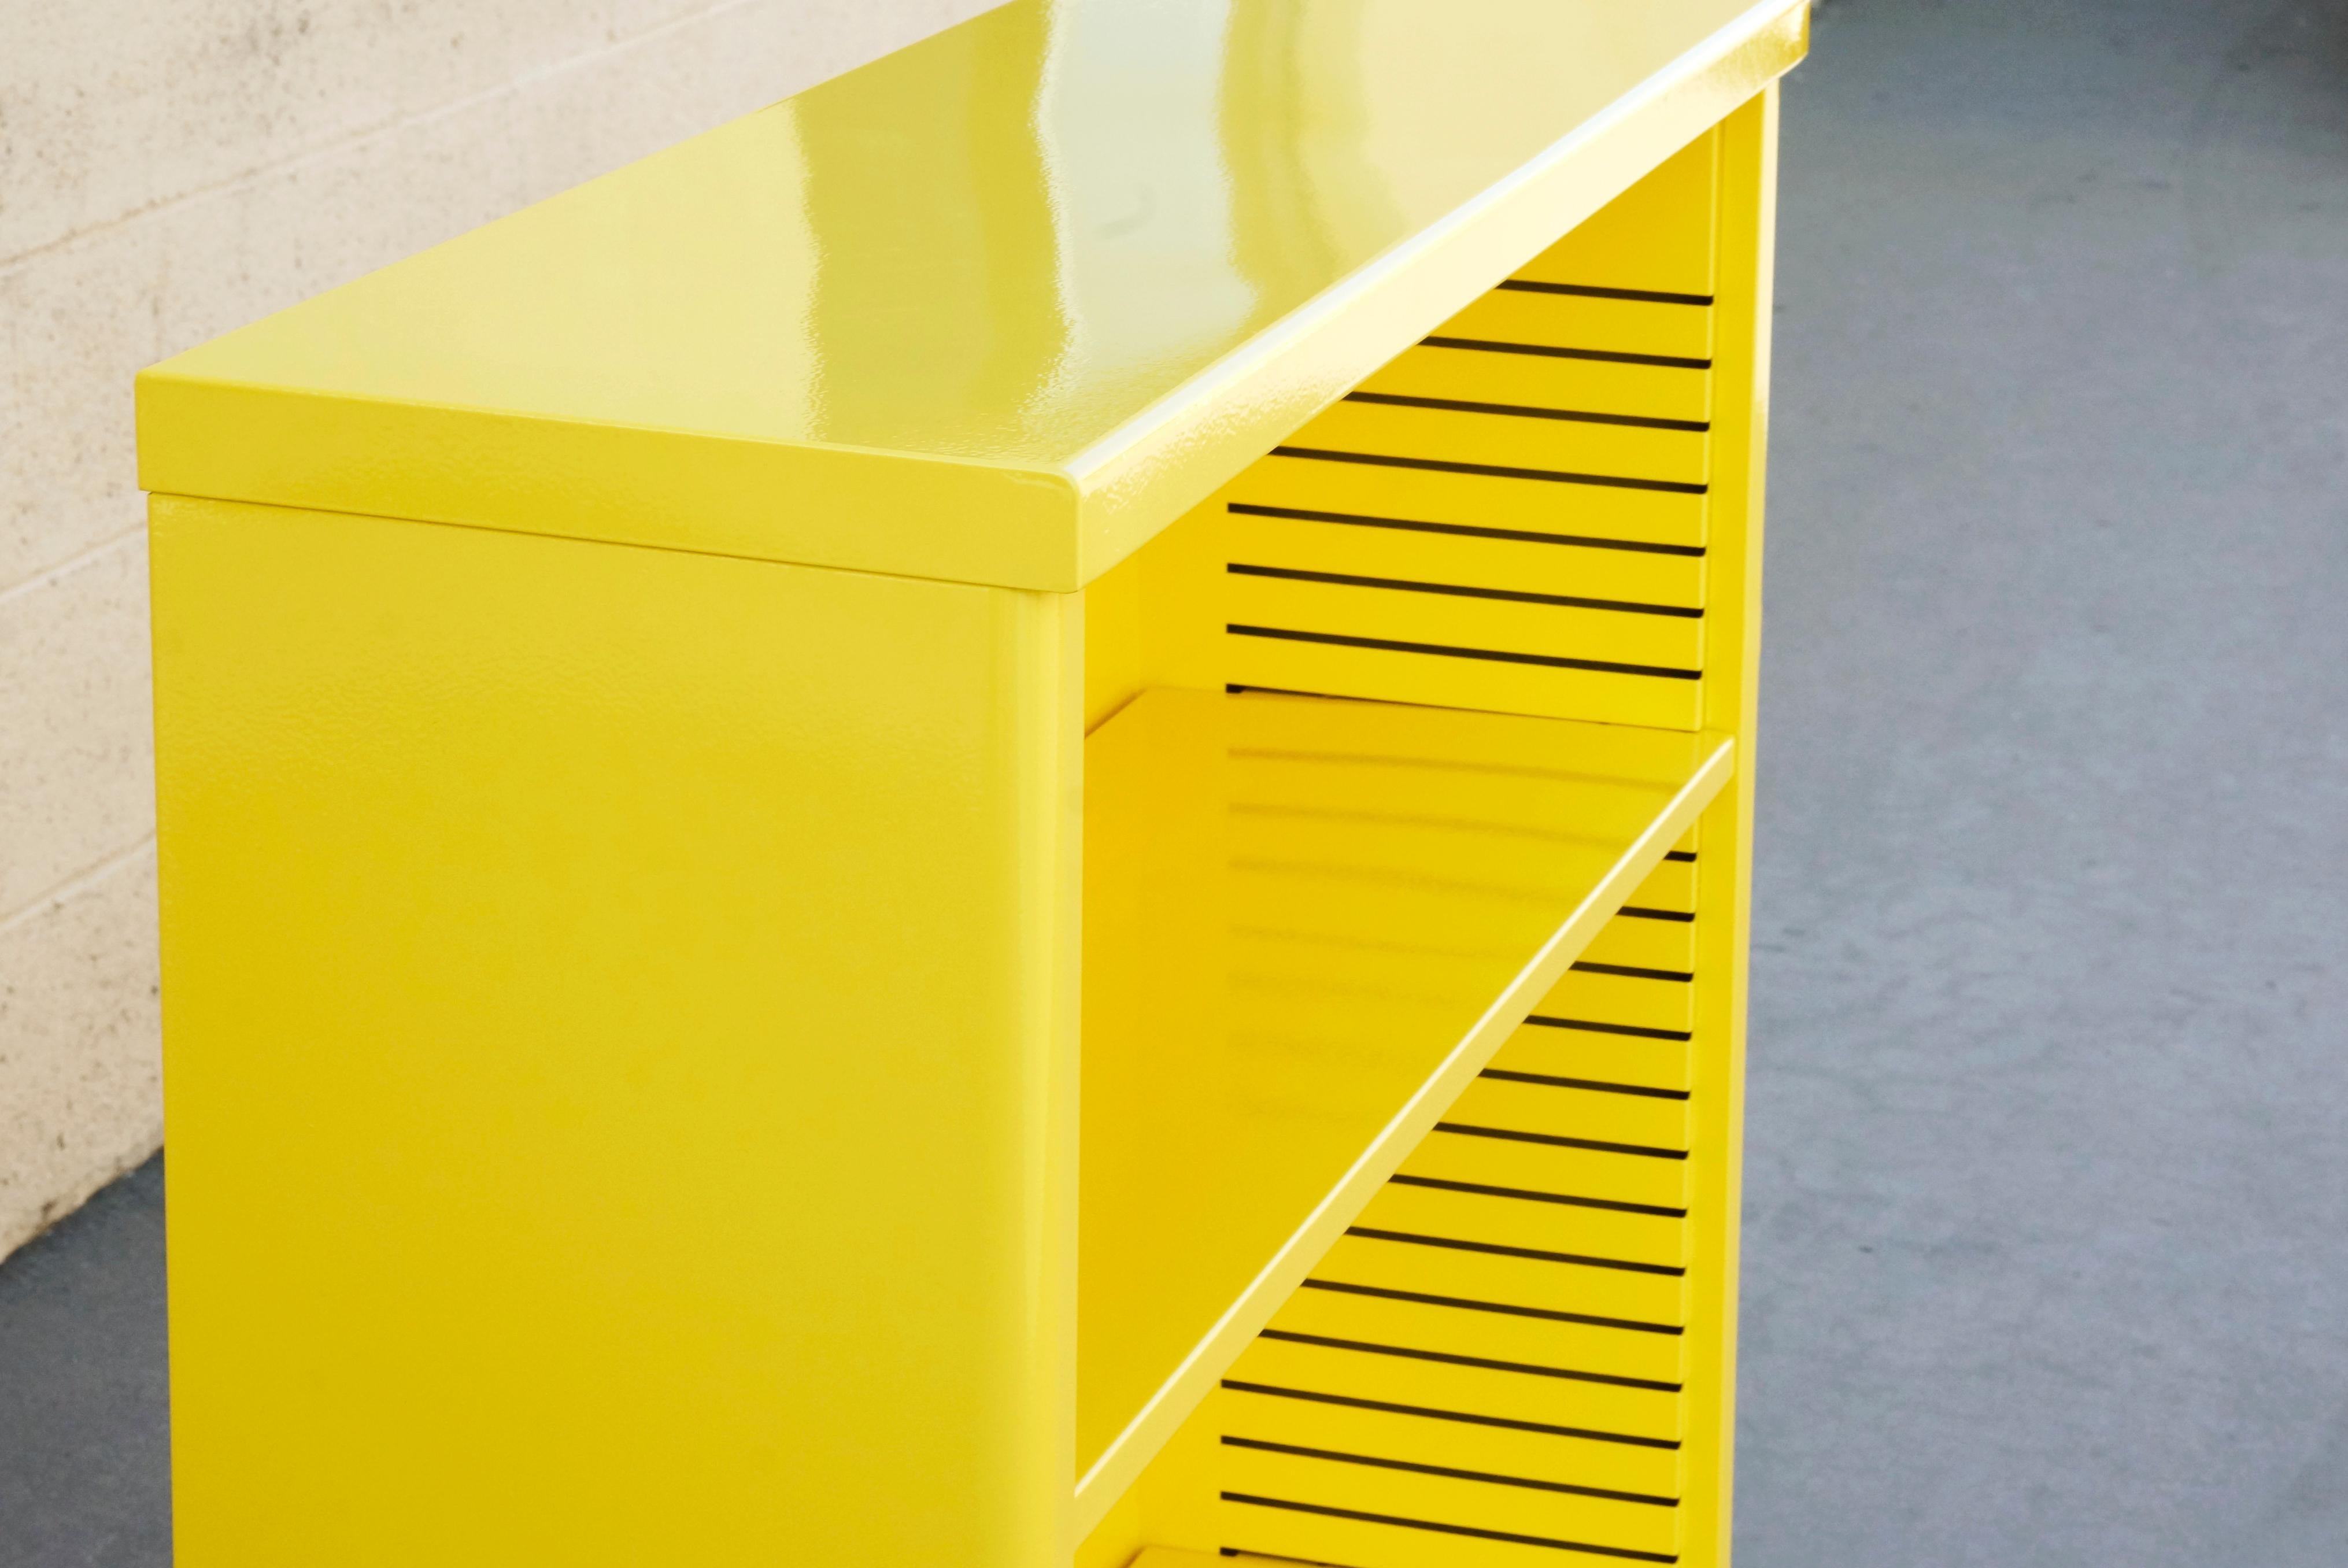 American 1960s Steel Bookcase in Yellow, Custom Refinished to Order For Sale